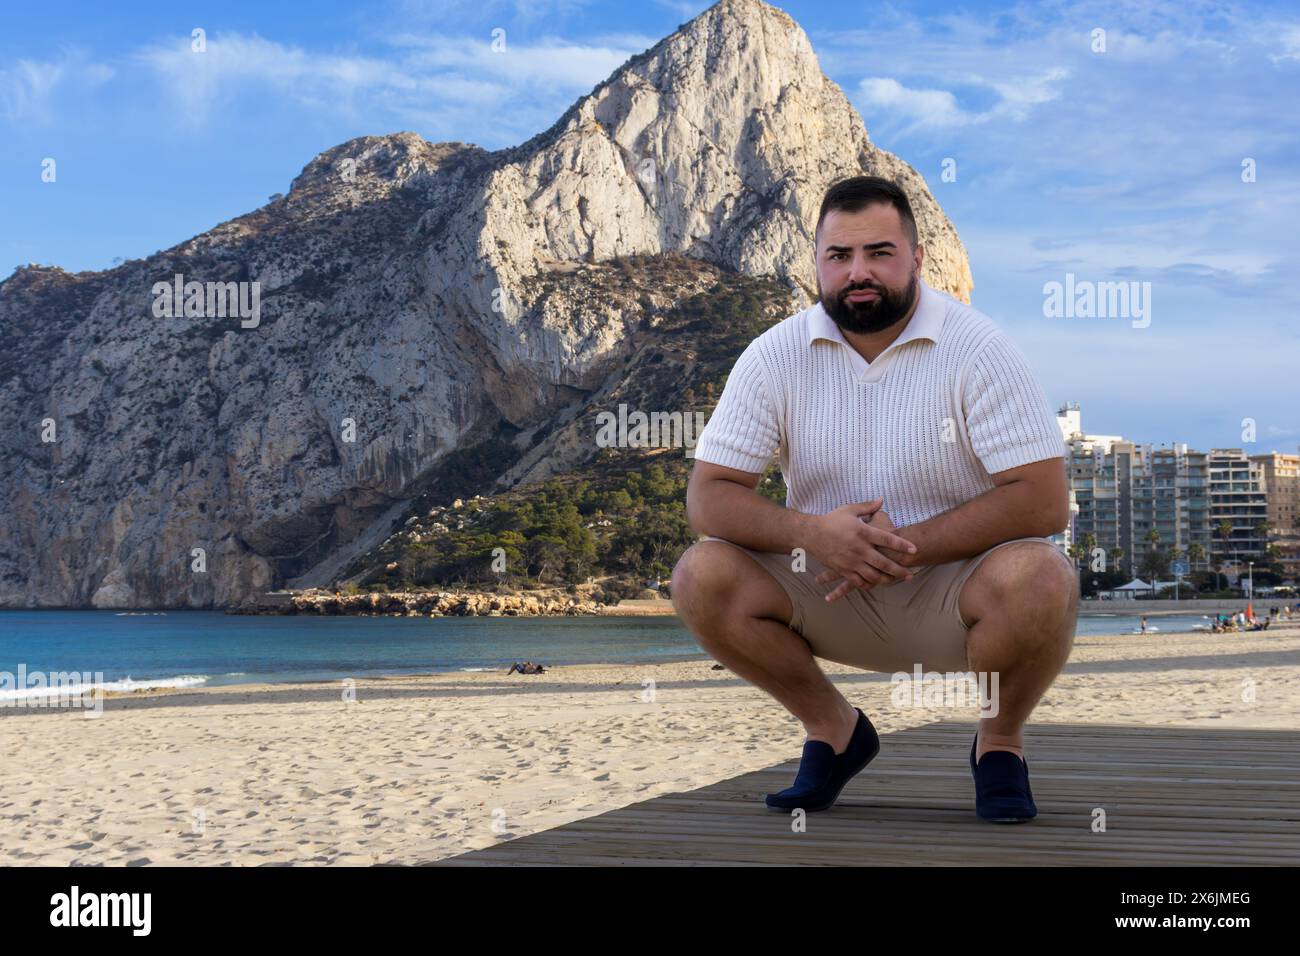 This evocative image captures a 30-year-old man in a moment of reflection, with the majestic Ifach Rock rising in the background. Stock Photo